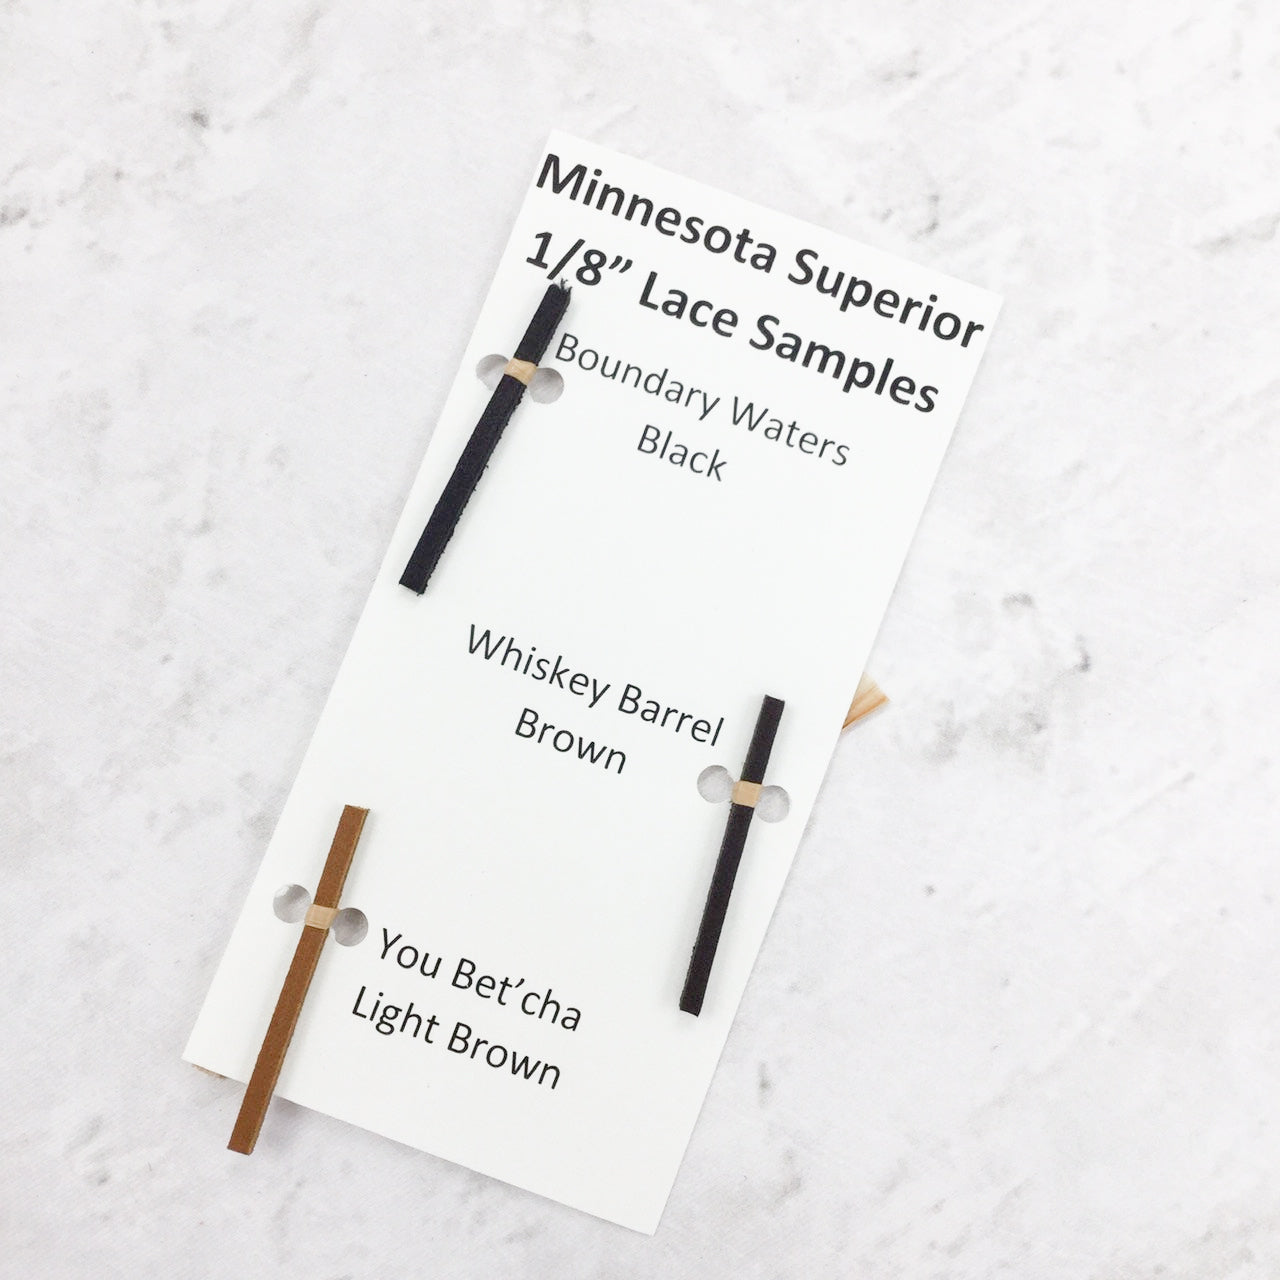 Leather Lace Sample Cards, Minnesota Superior / 1/8" | The Leather Guy